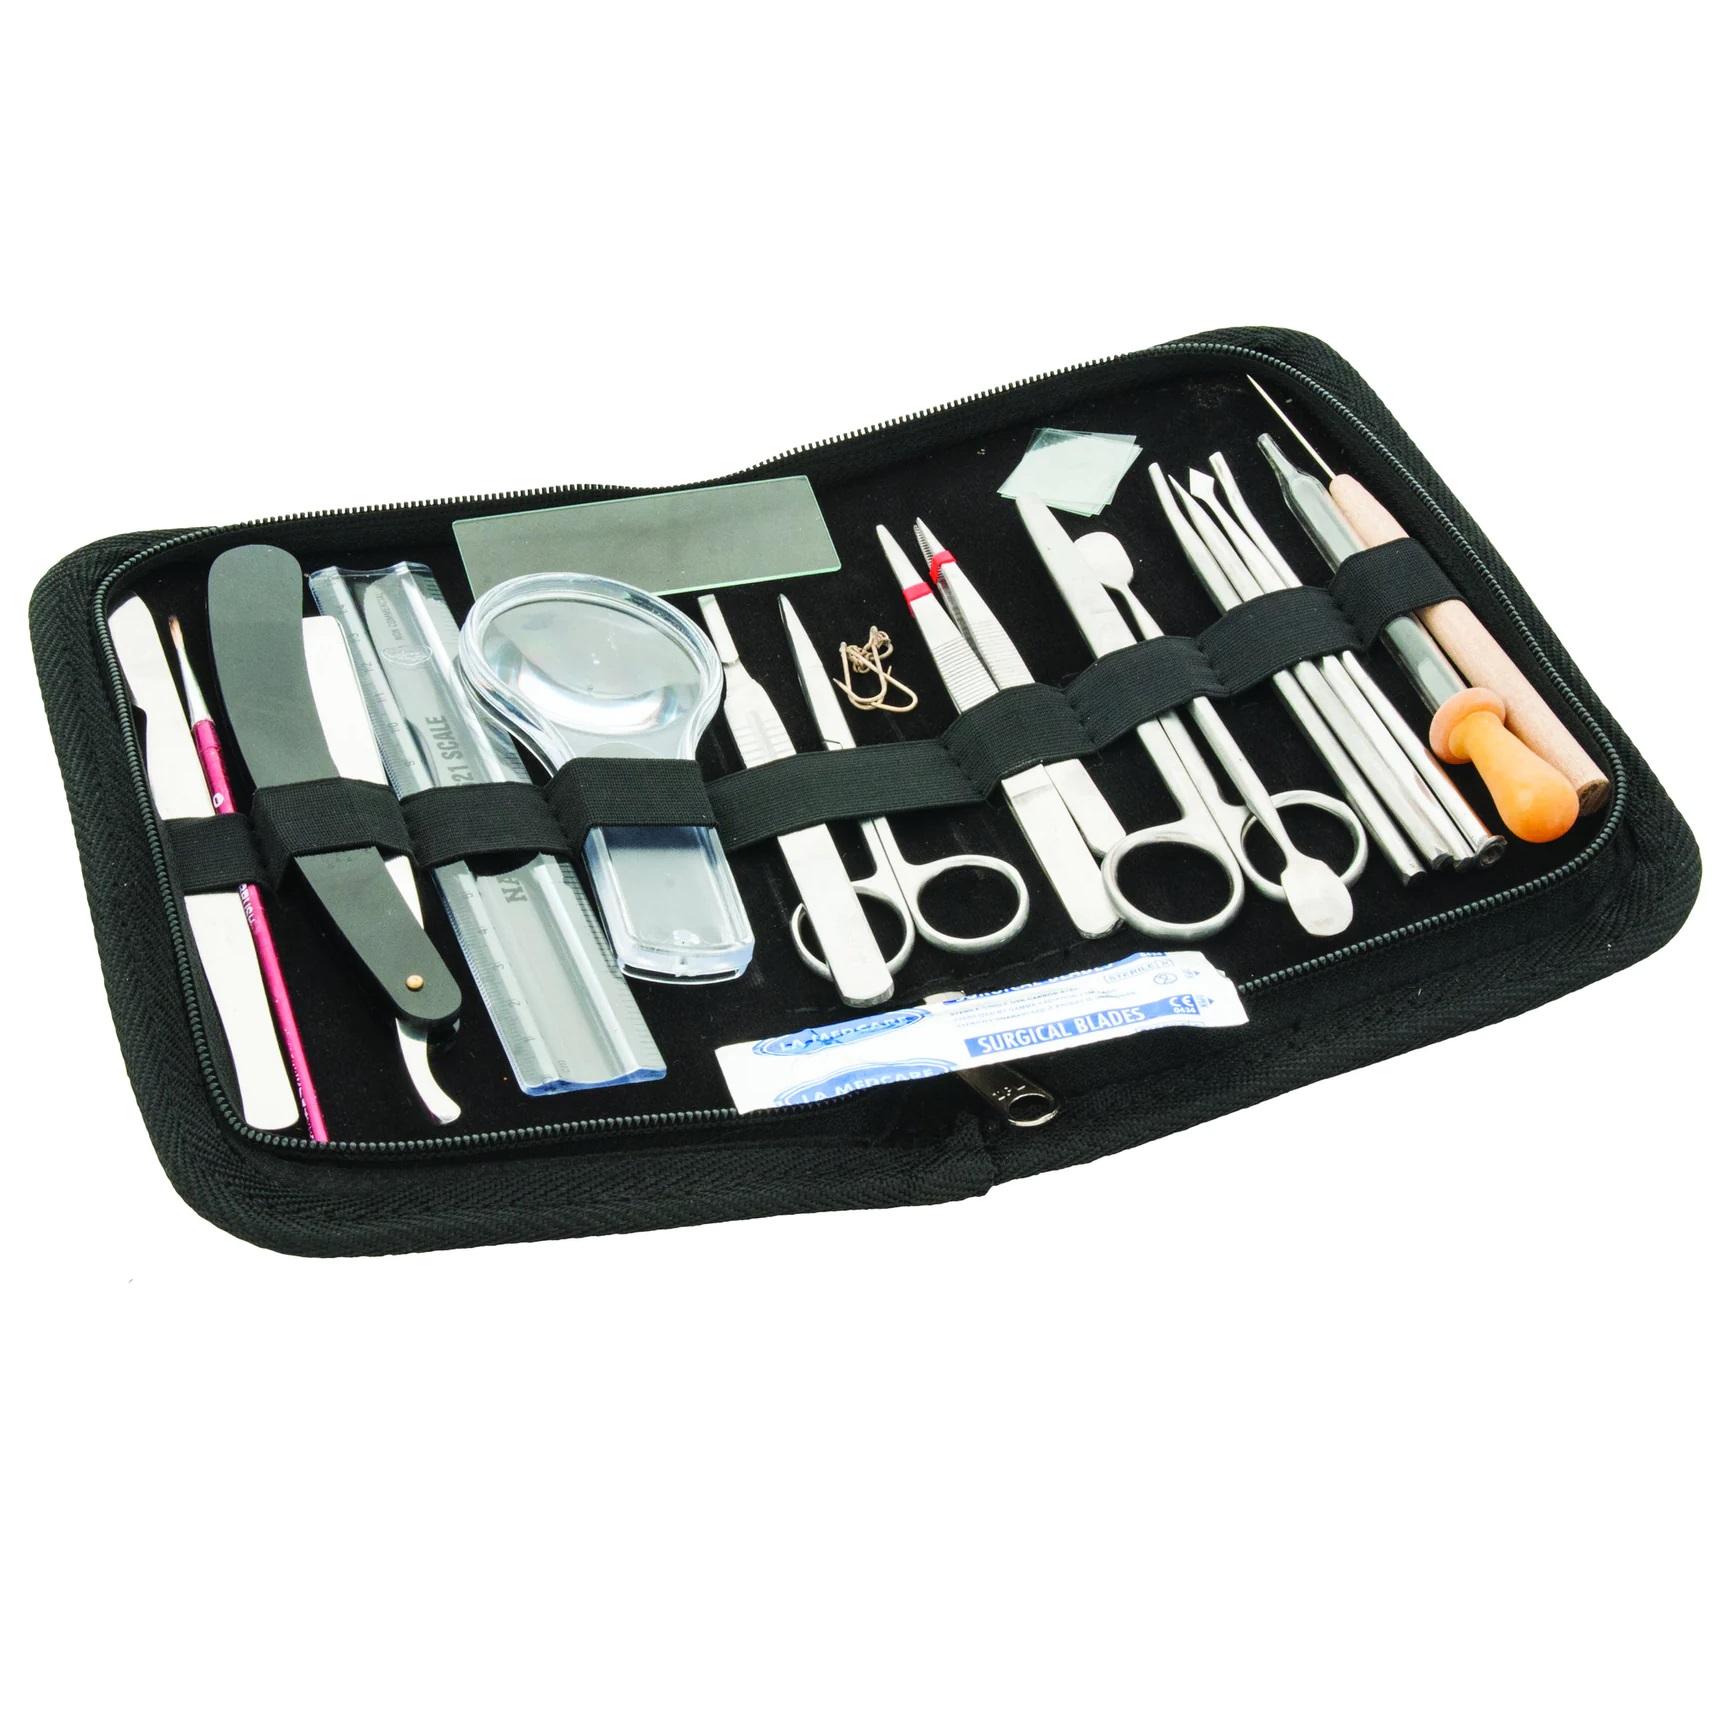 Dissecting Set - 20-piece Dissecting set